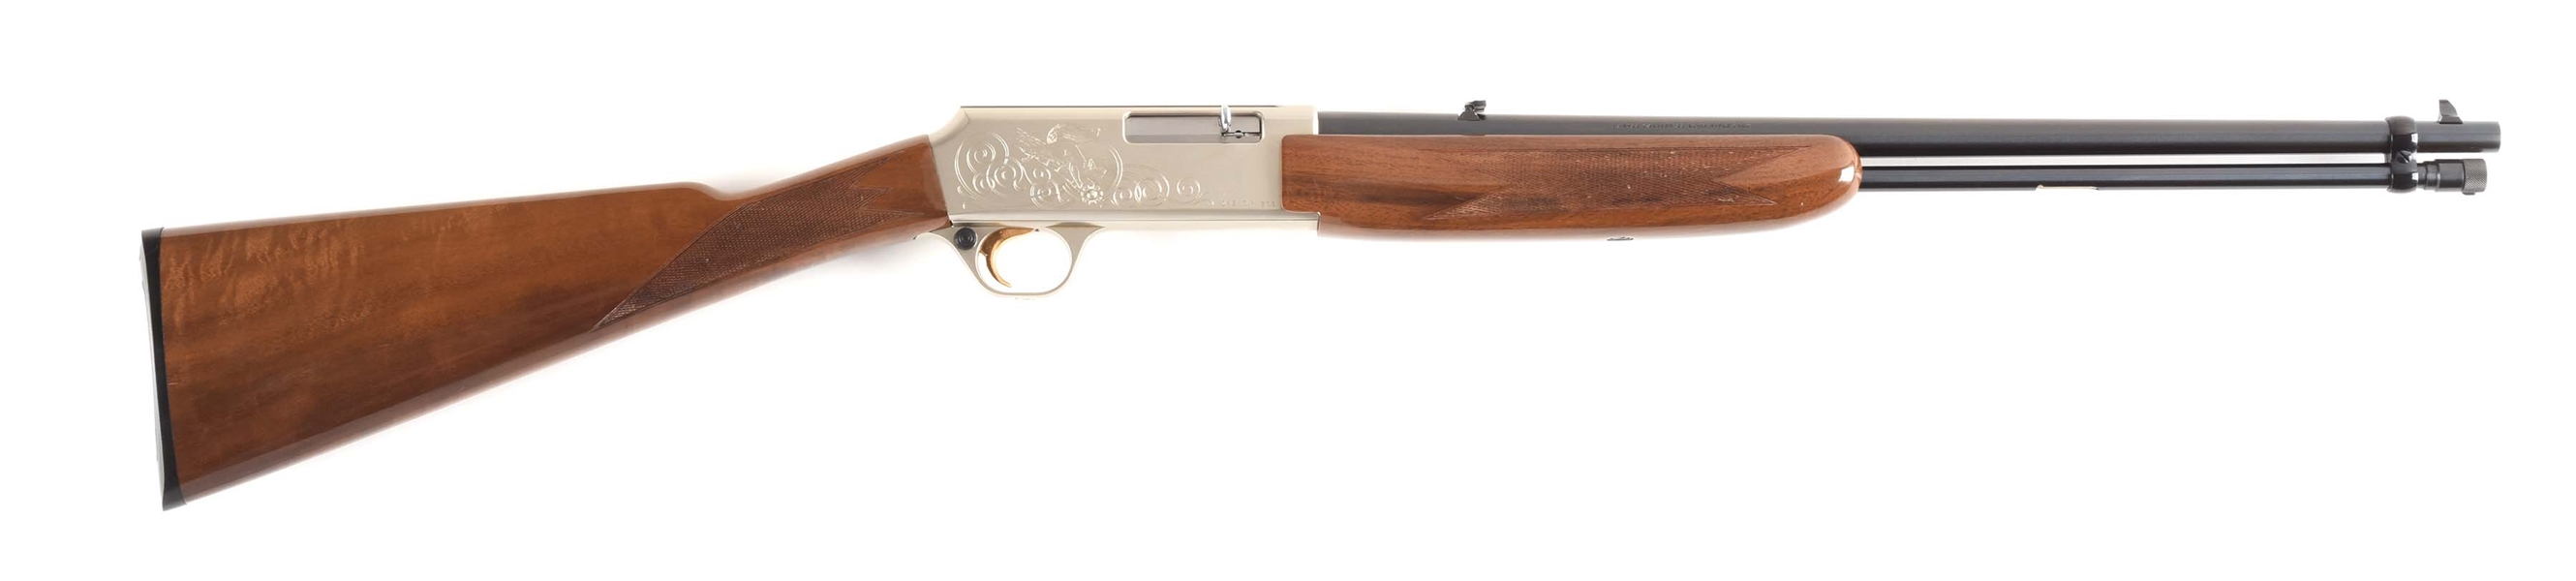 (M) ENGRAVED GRADE II BROWNING .22 SEMI-AUTOMATIC RIFLE (1983).